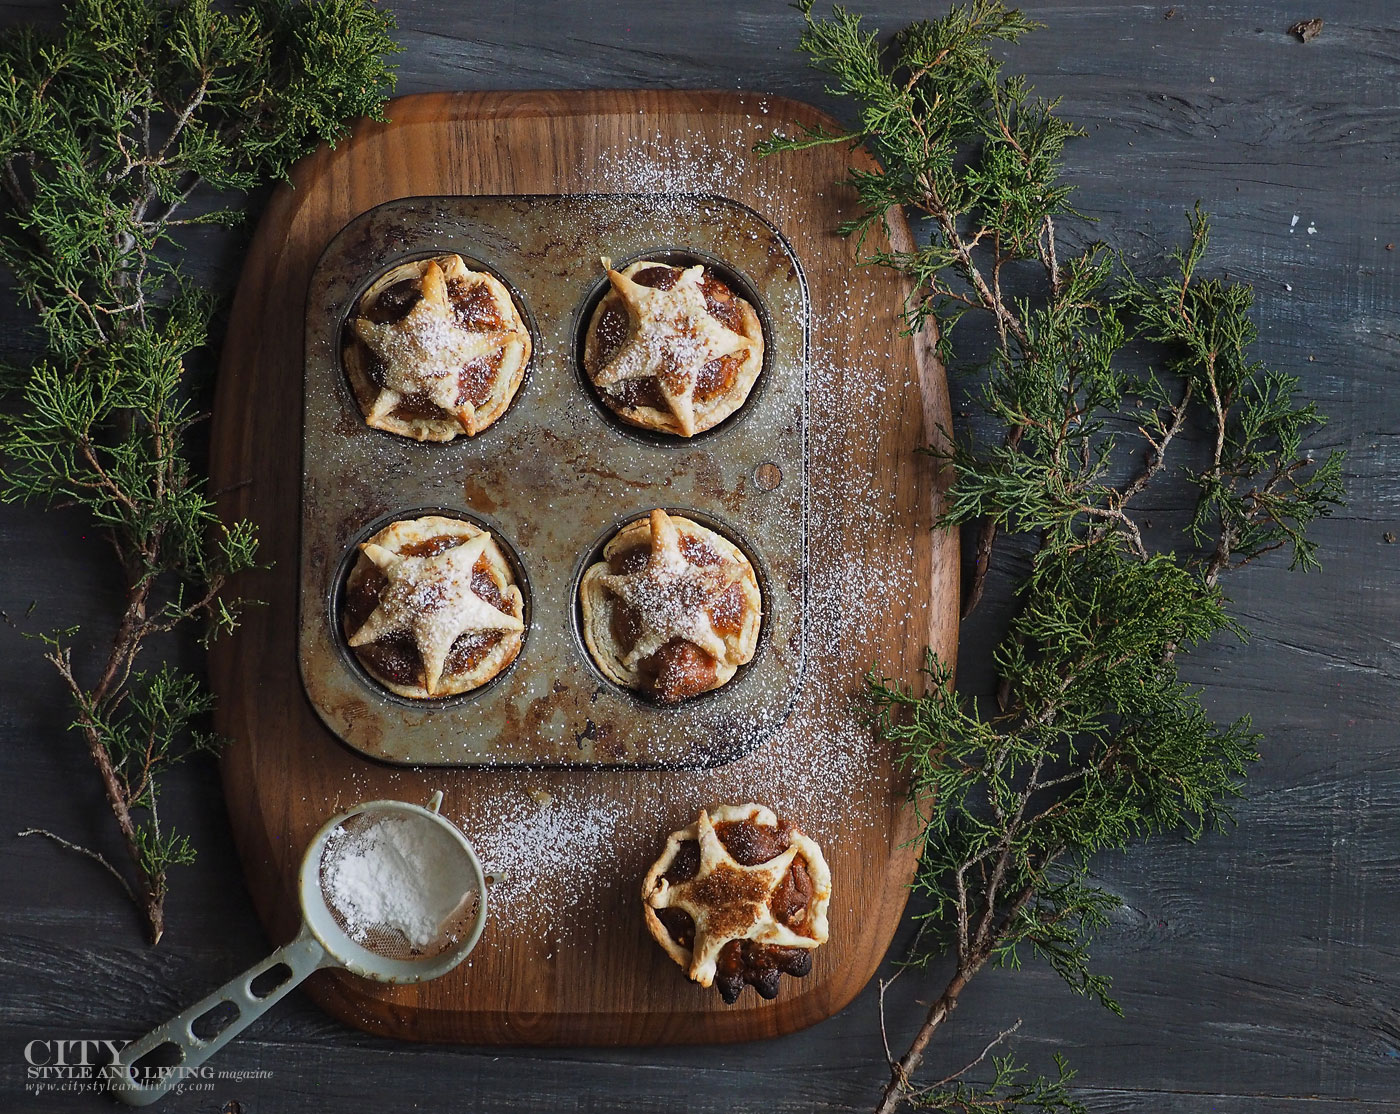 City Style and Living Magazine Winter Holiday baking shortcuts Mincemeat Tarts